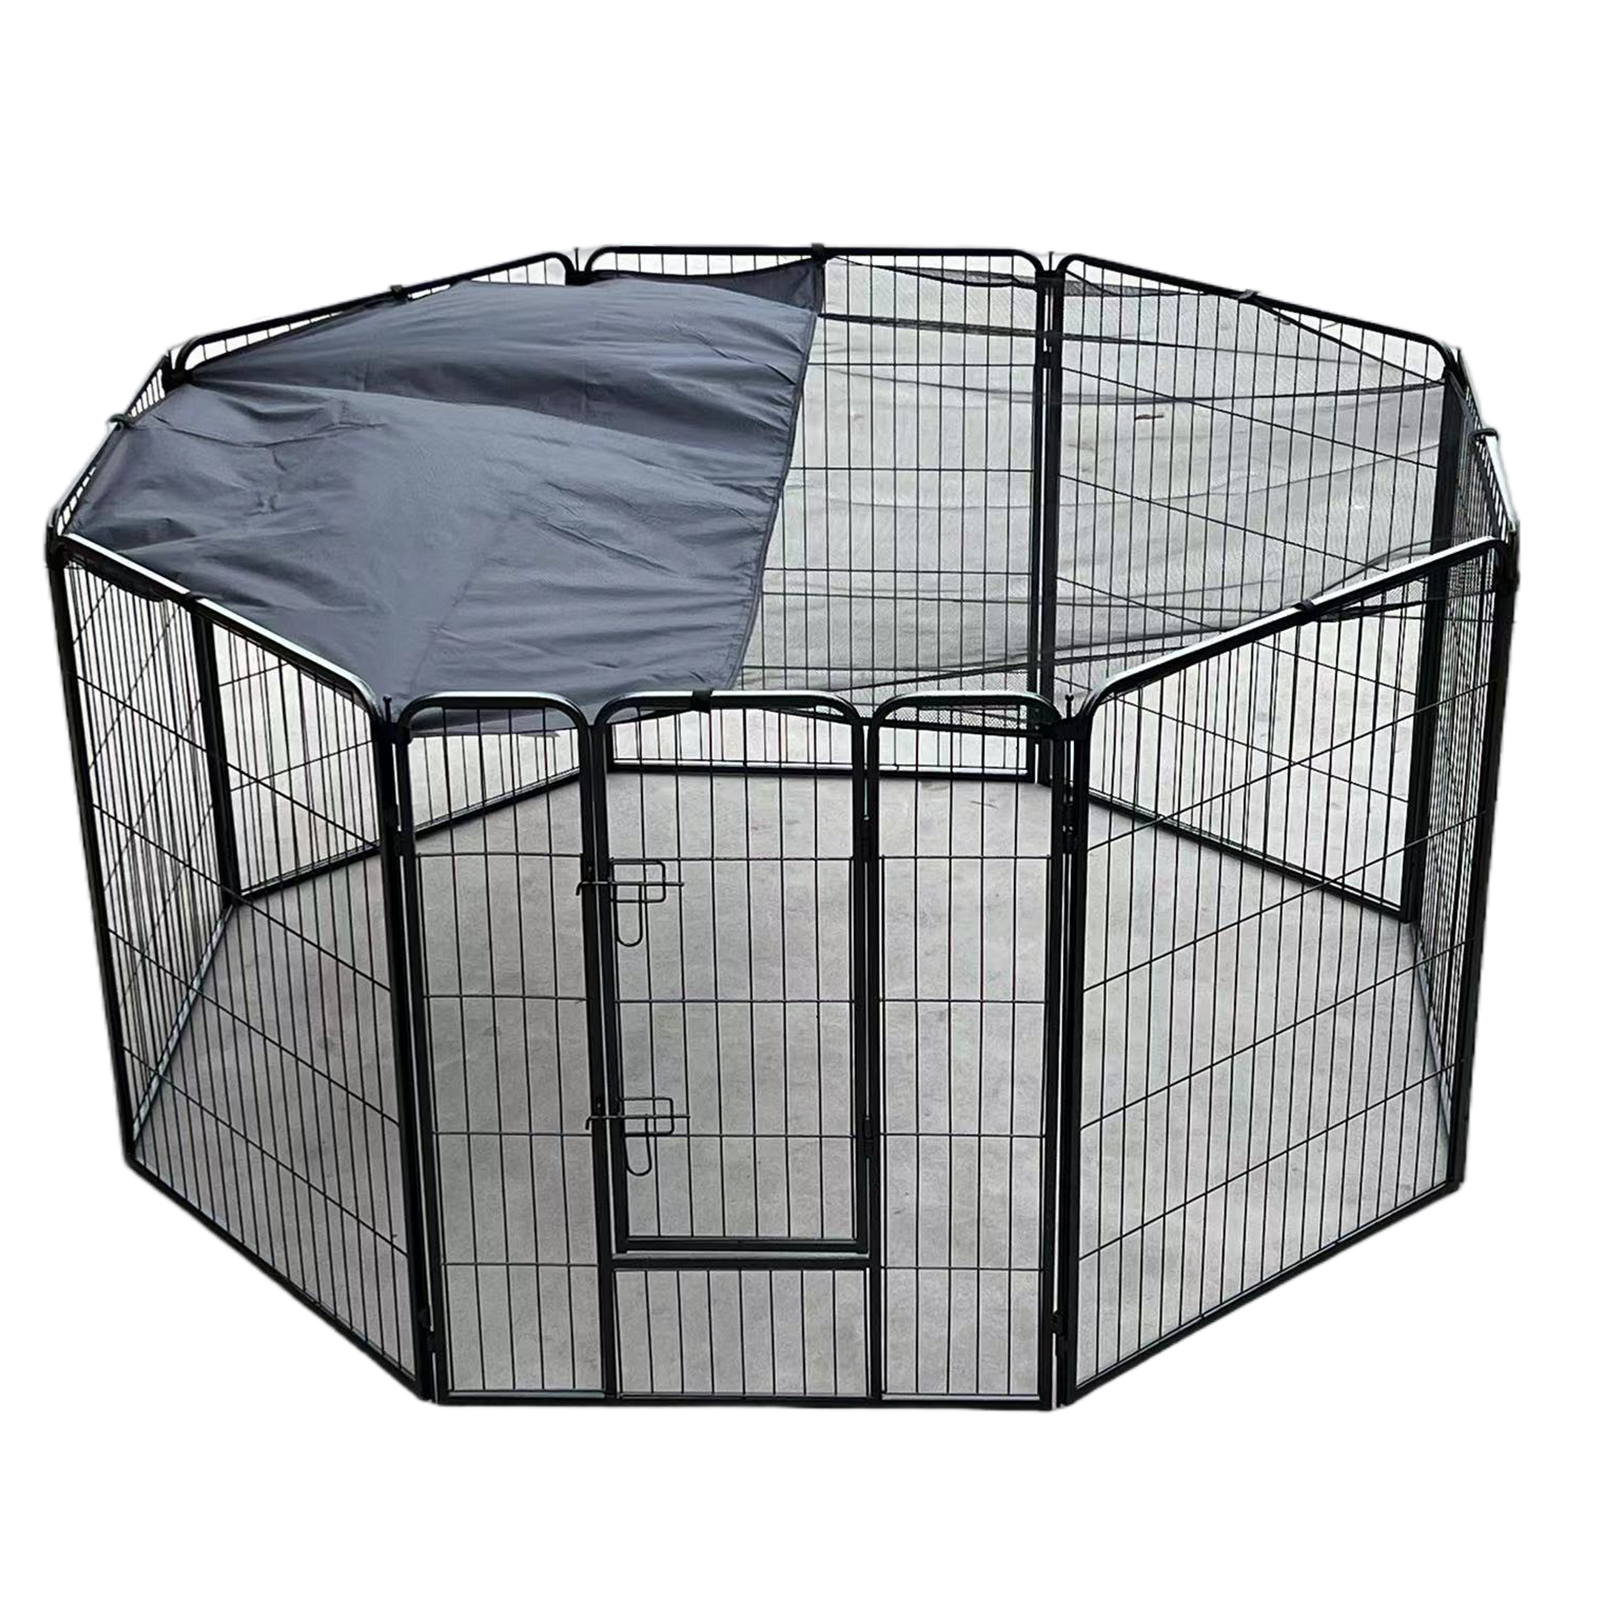 YES4PETS 100 cm Heavy Duty Pet Dog Cat Puppy Rabbit Exercise Playpen Fence With Cover